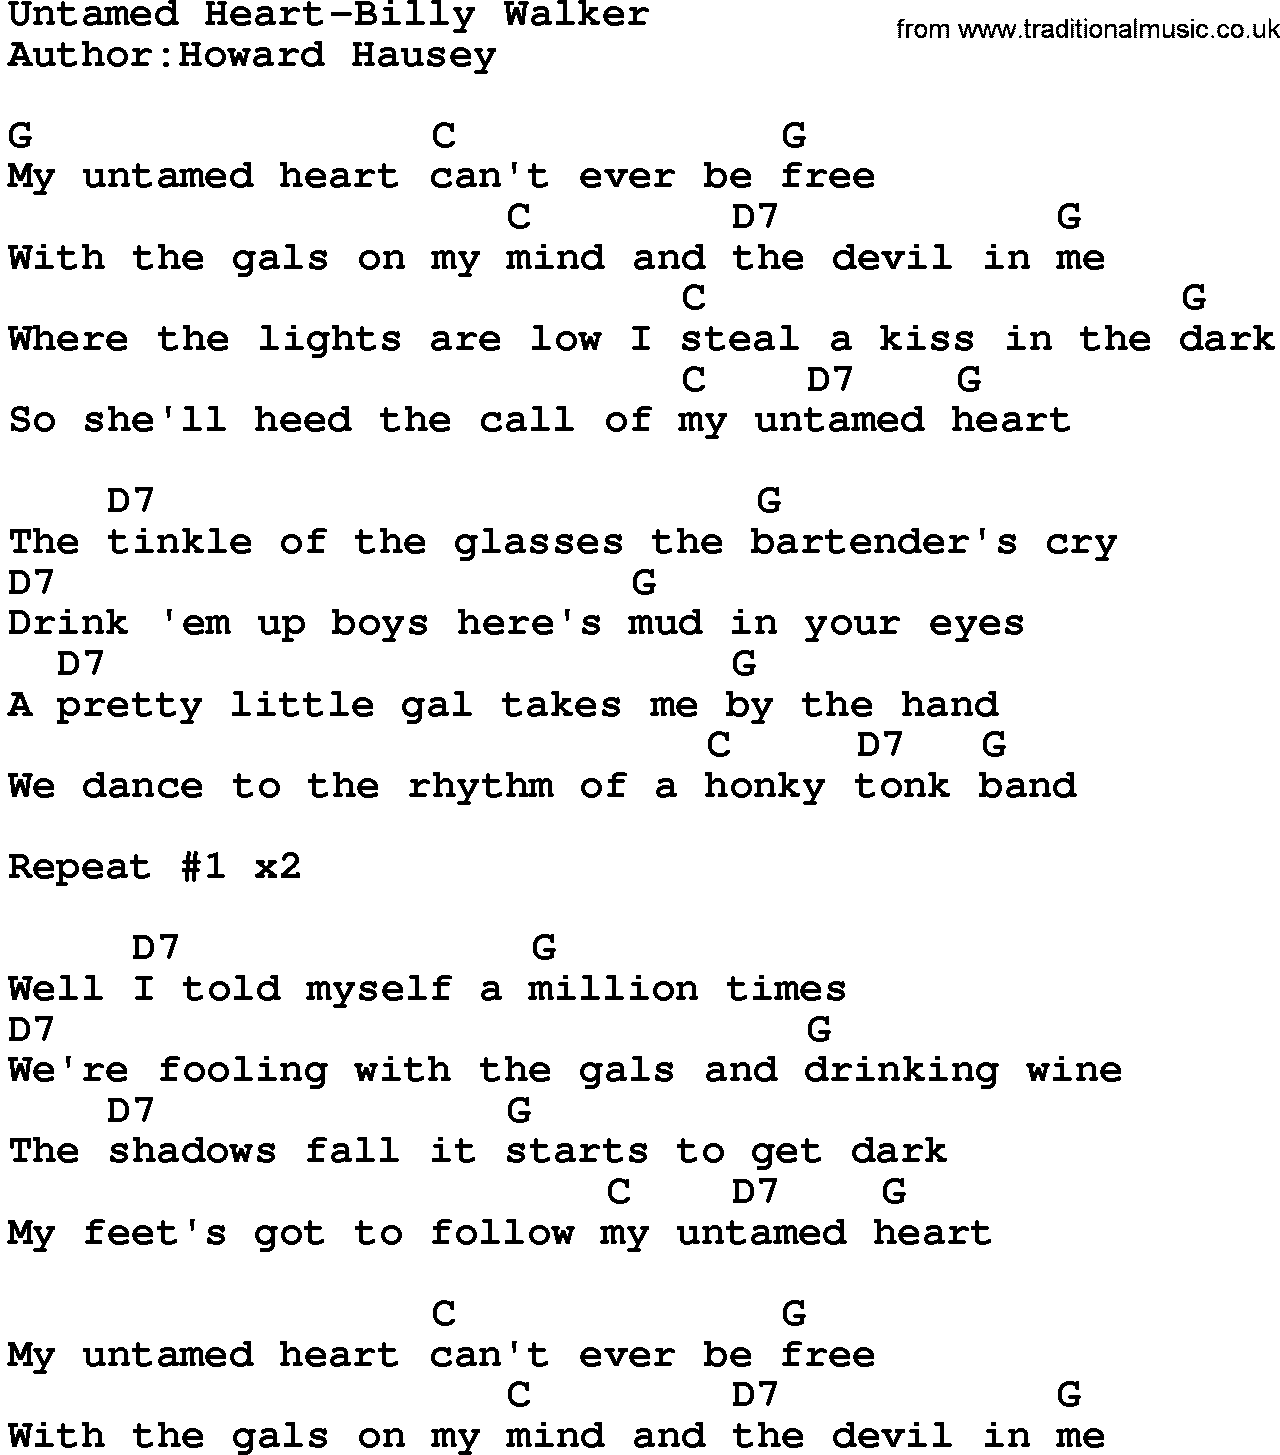 Country music song: Untamed Heart-Billy Walker lyrics and chords